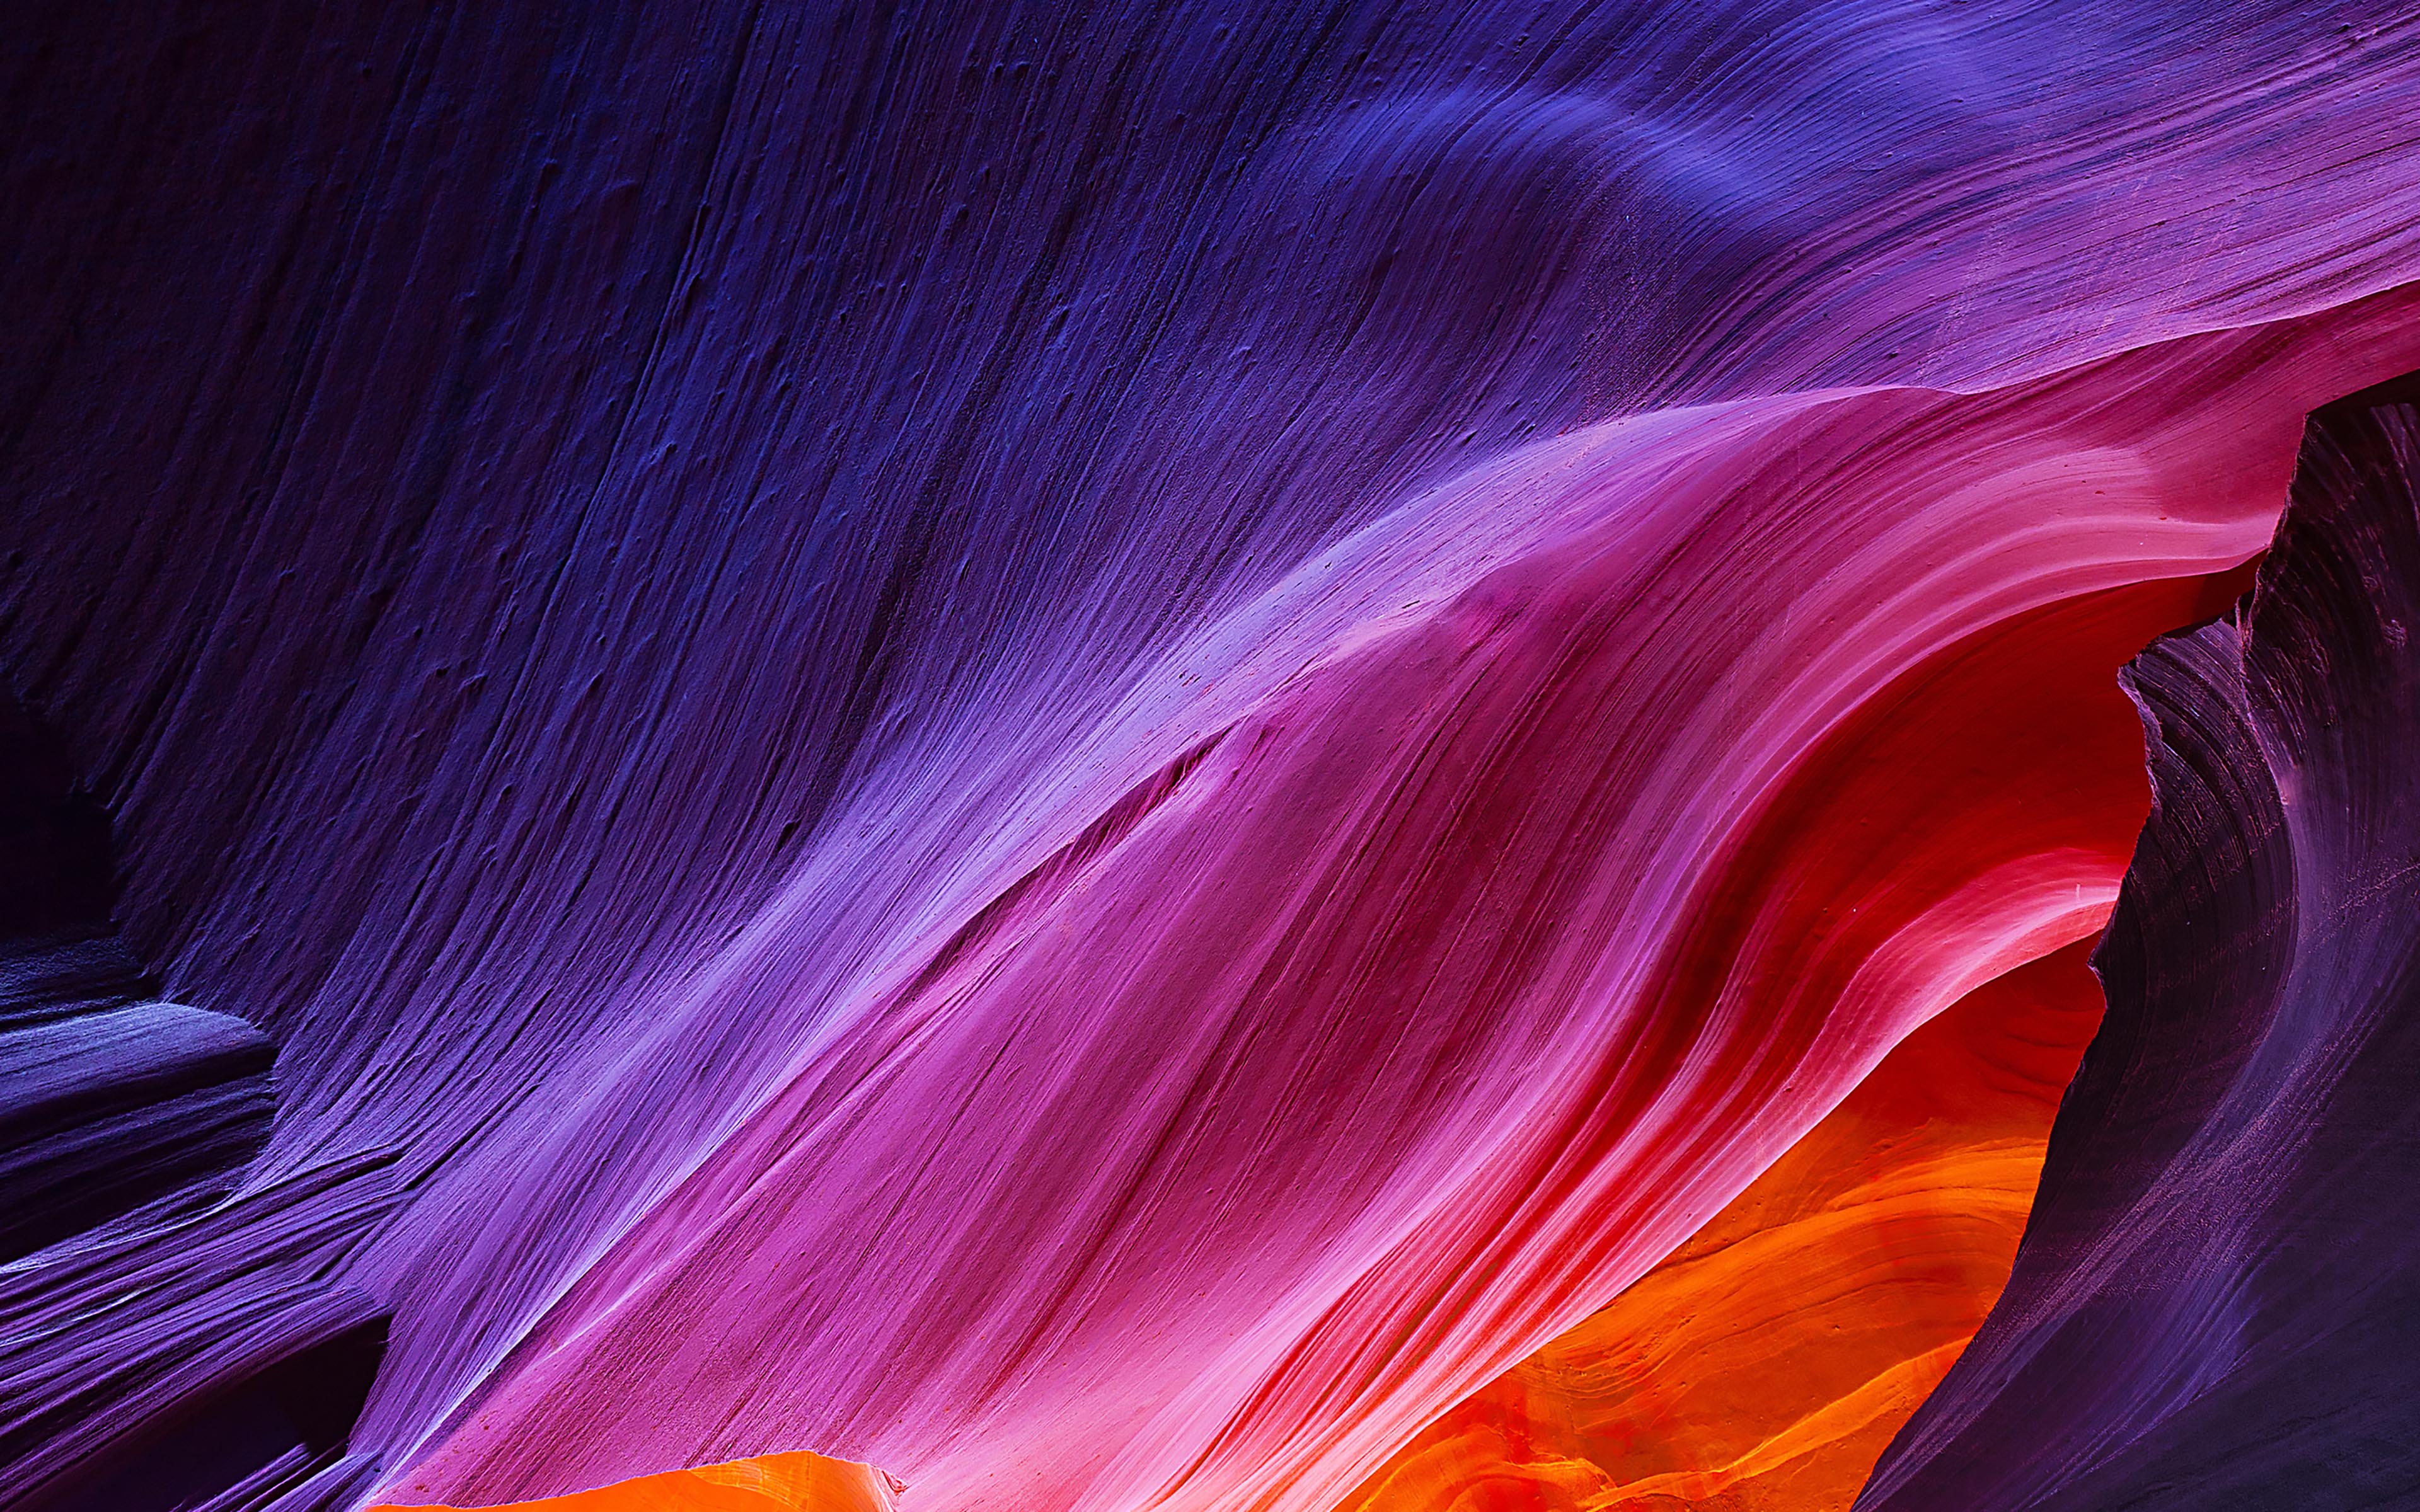 Stock 4K Ultra HD OnePlus 5 Wallpapers in 3840  2160 px Resolution   XDA Forums